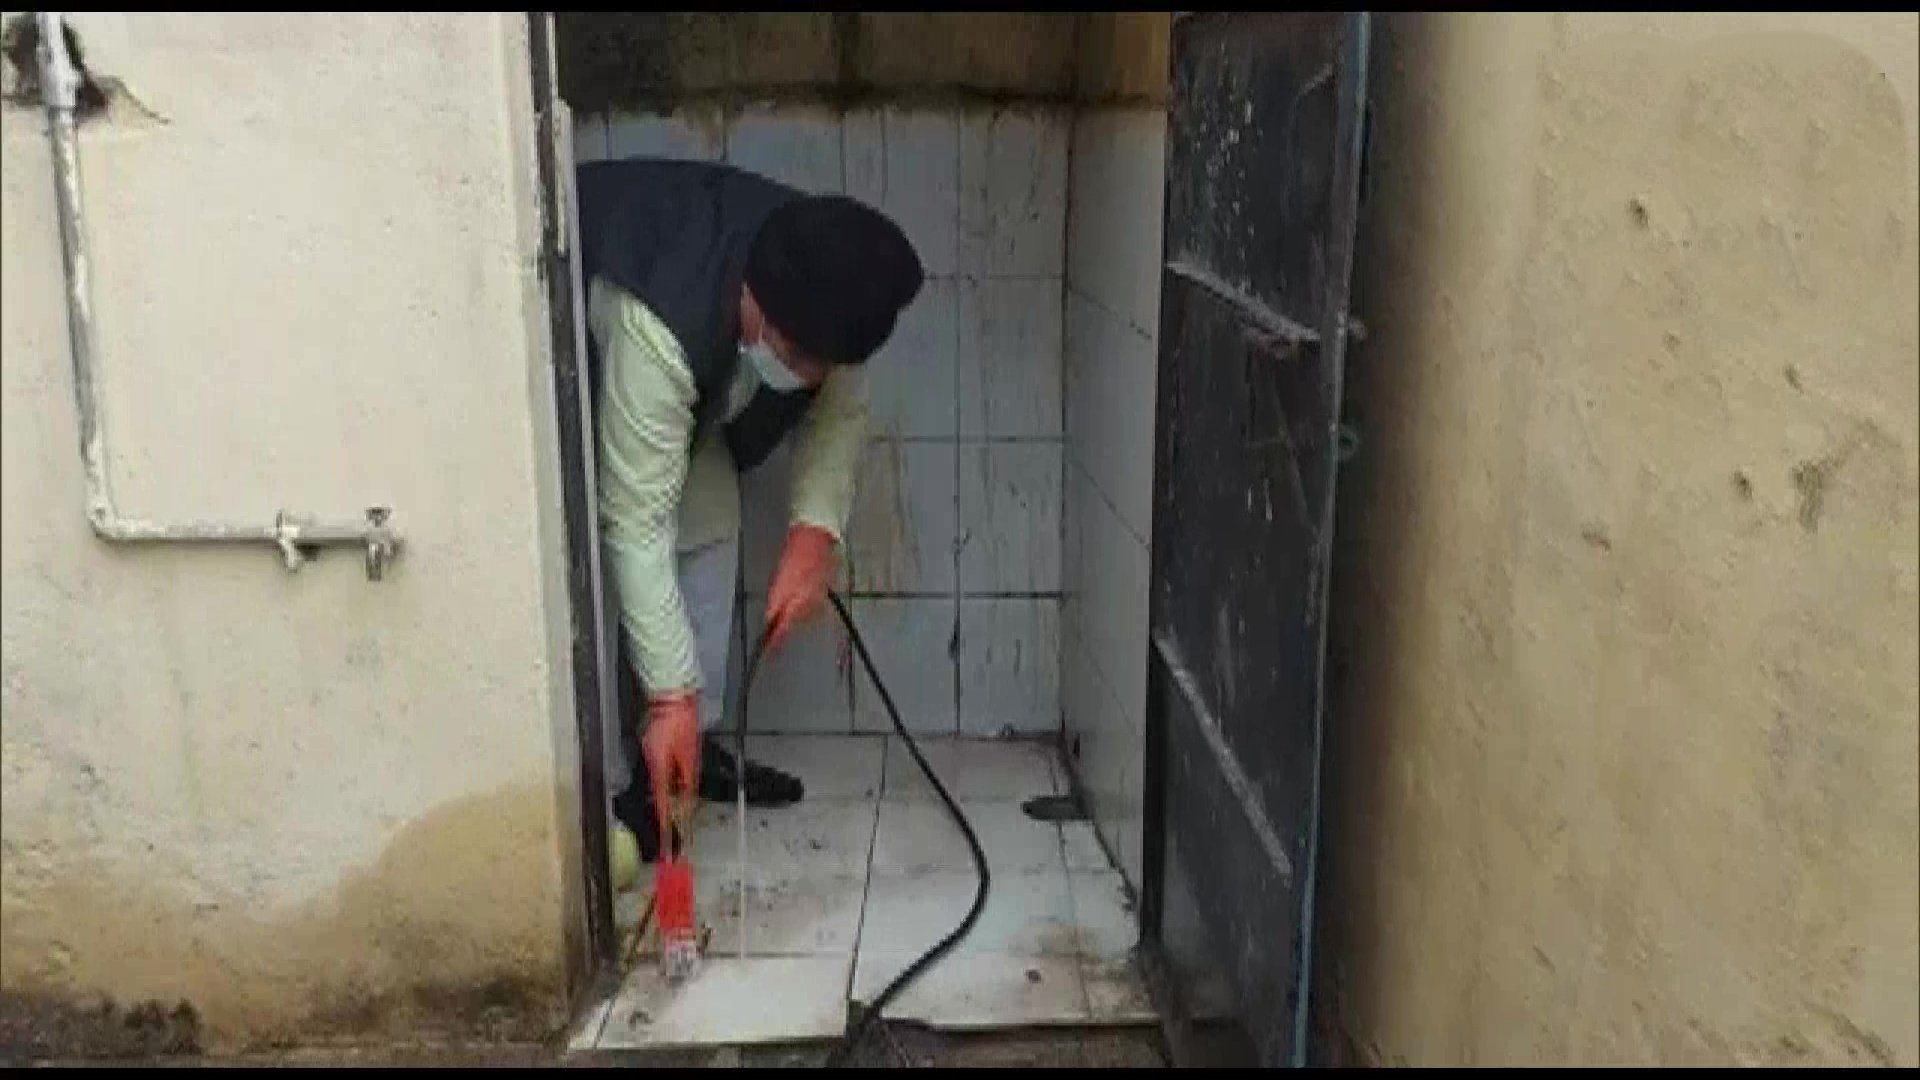 MINISTER TOILET CLEANING